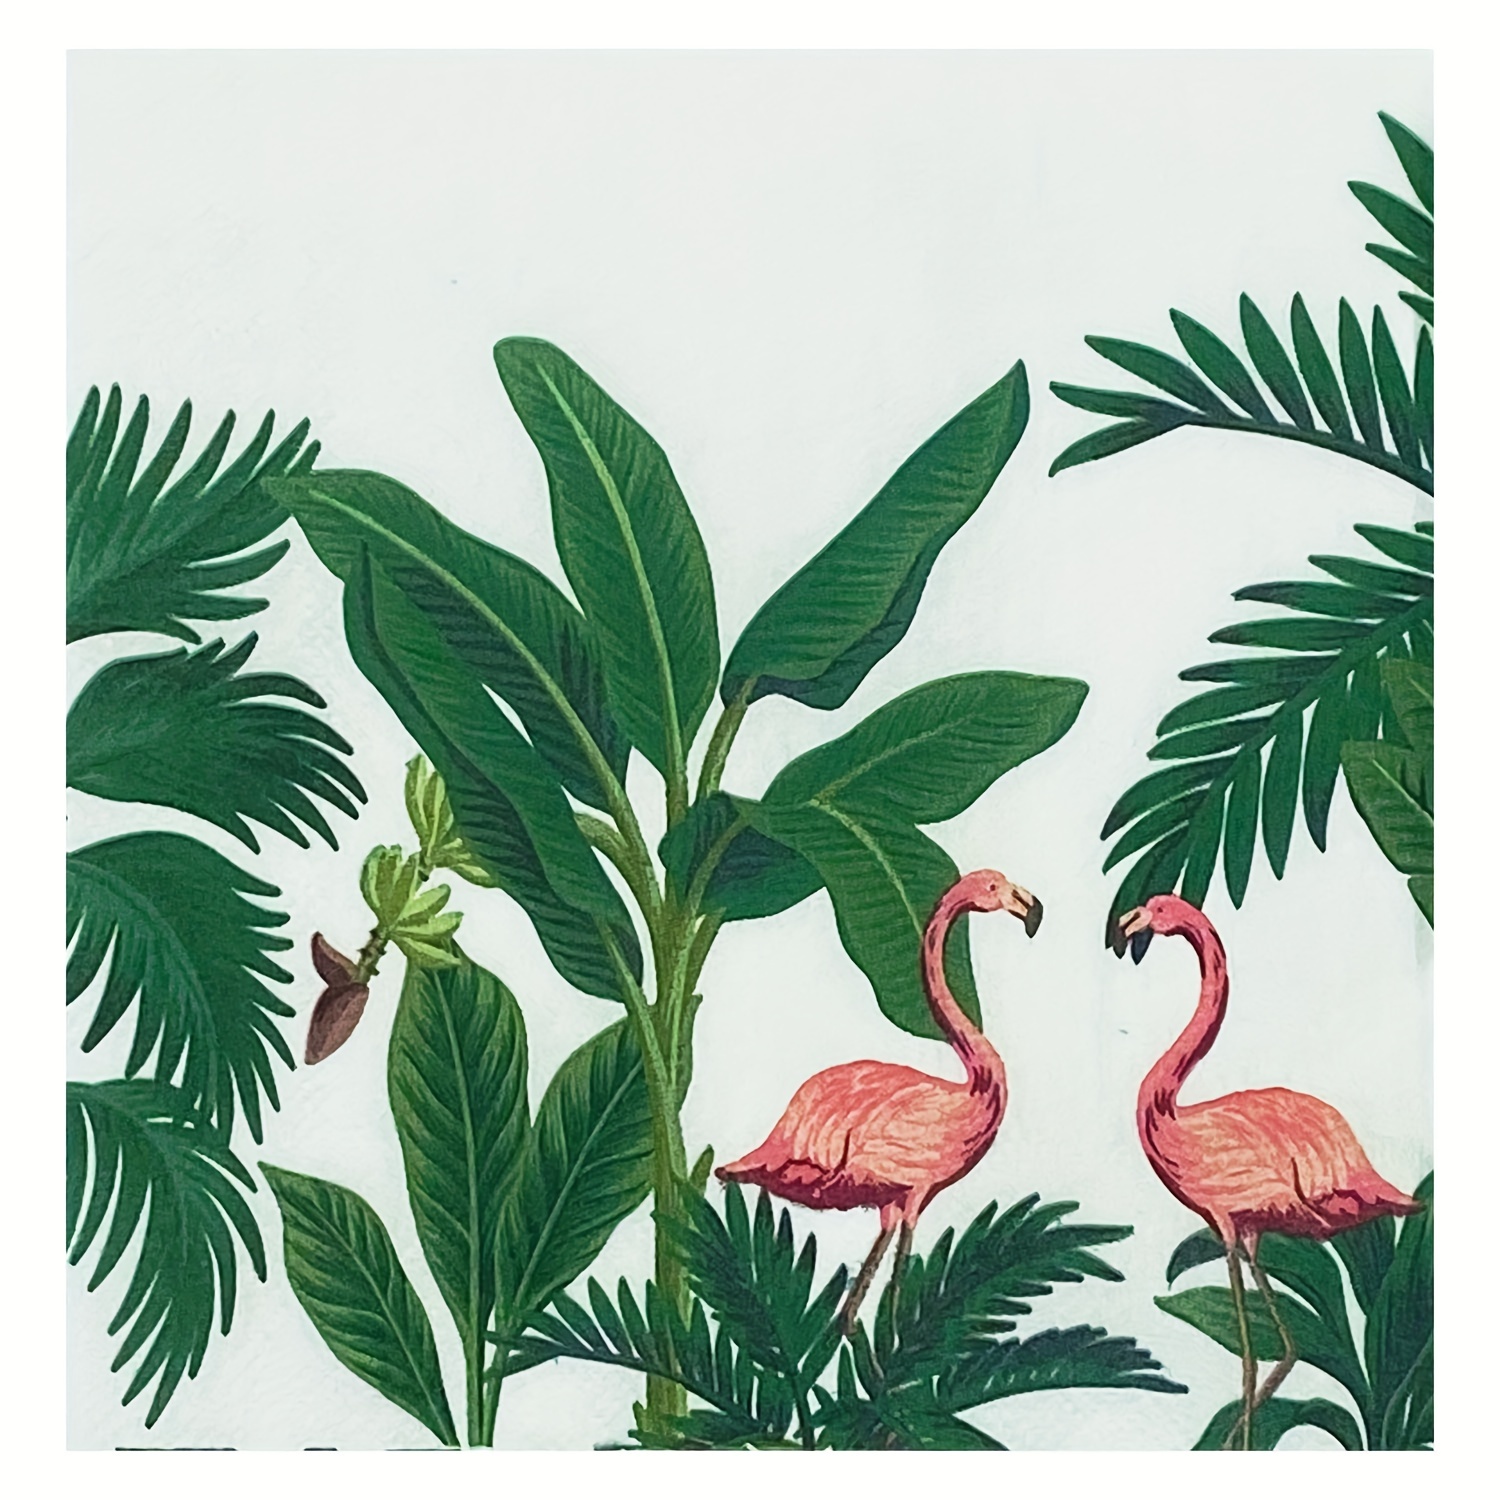 20 Sheets Flamingo Paper Napkins Disposable Party Tableware Summer